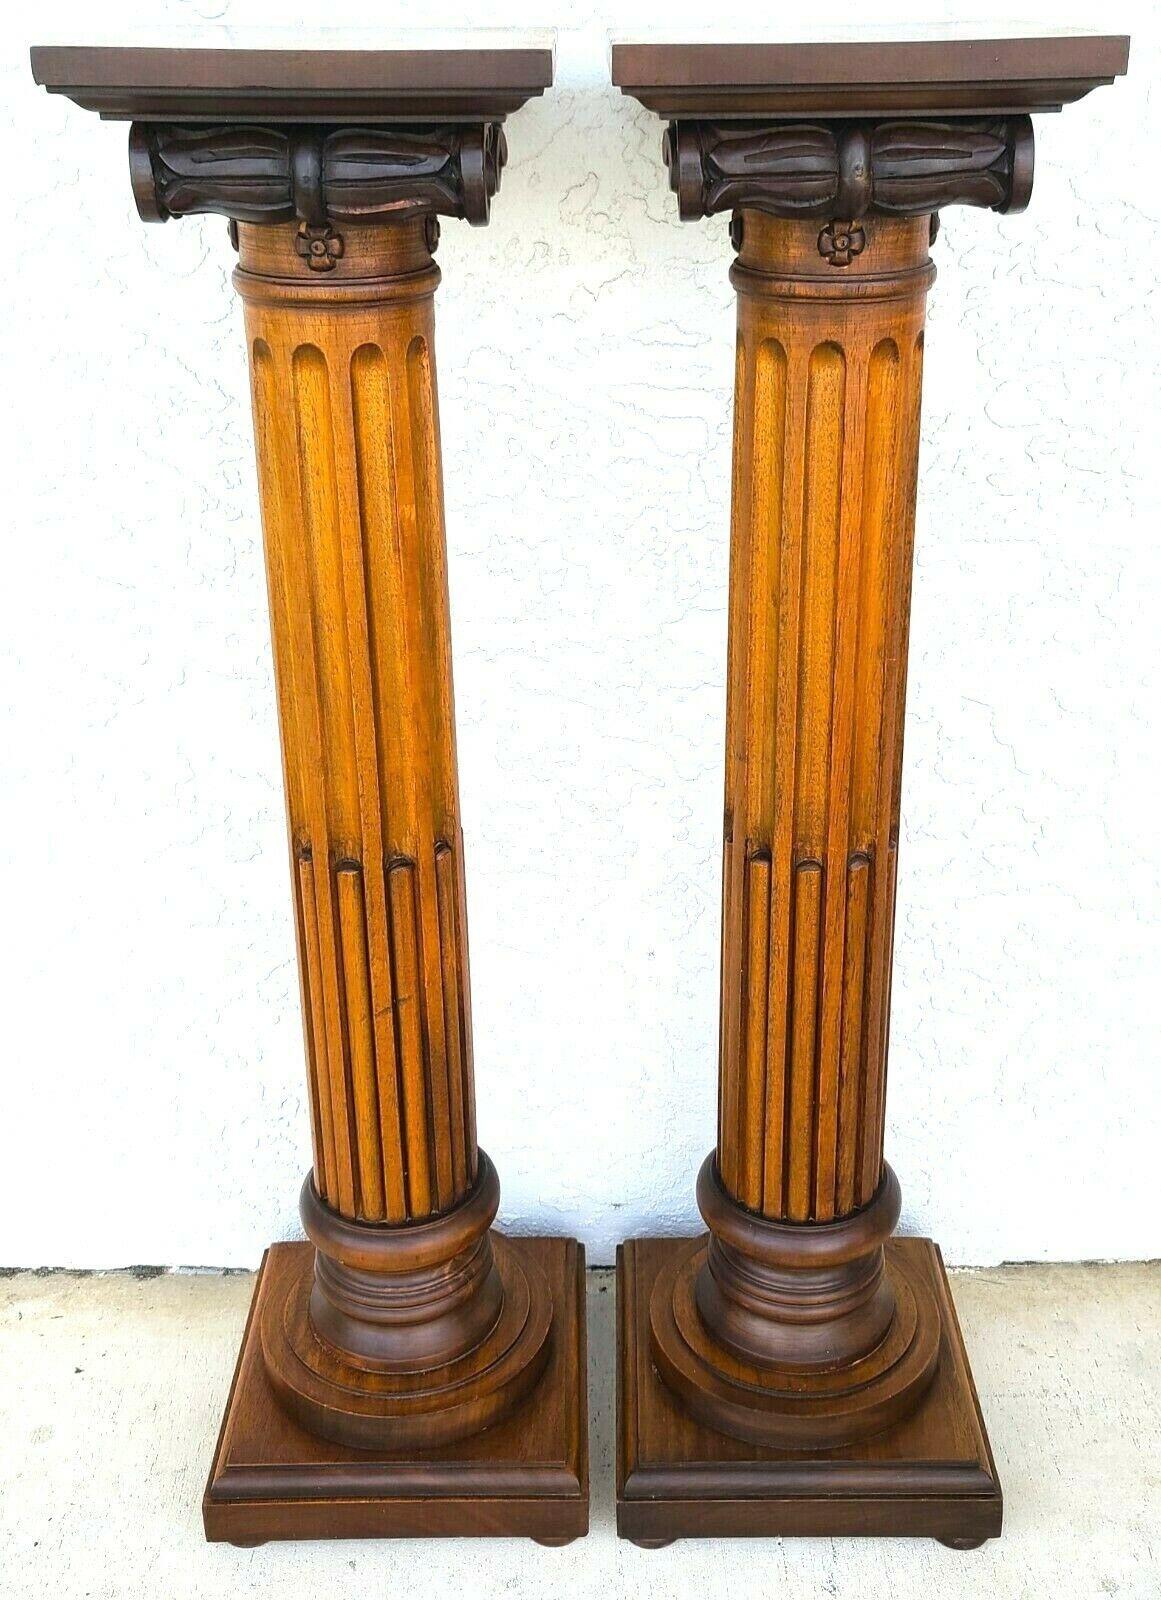 Offering one of our recent palm beach estate fine furniture acquisitions of a walnut pedestal display stands by Decorative Crafts 

Approximate measurements in inches
40